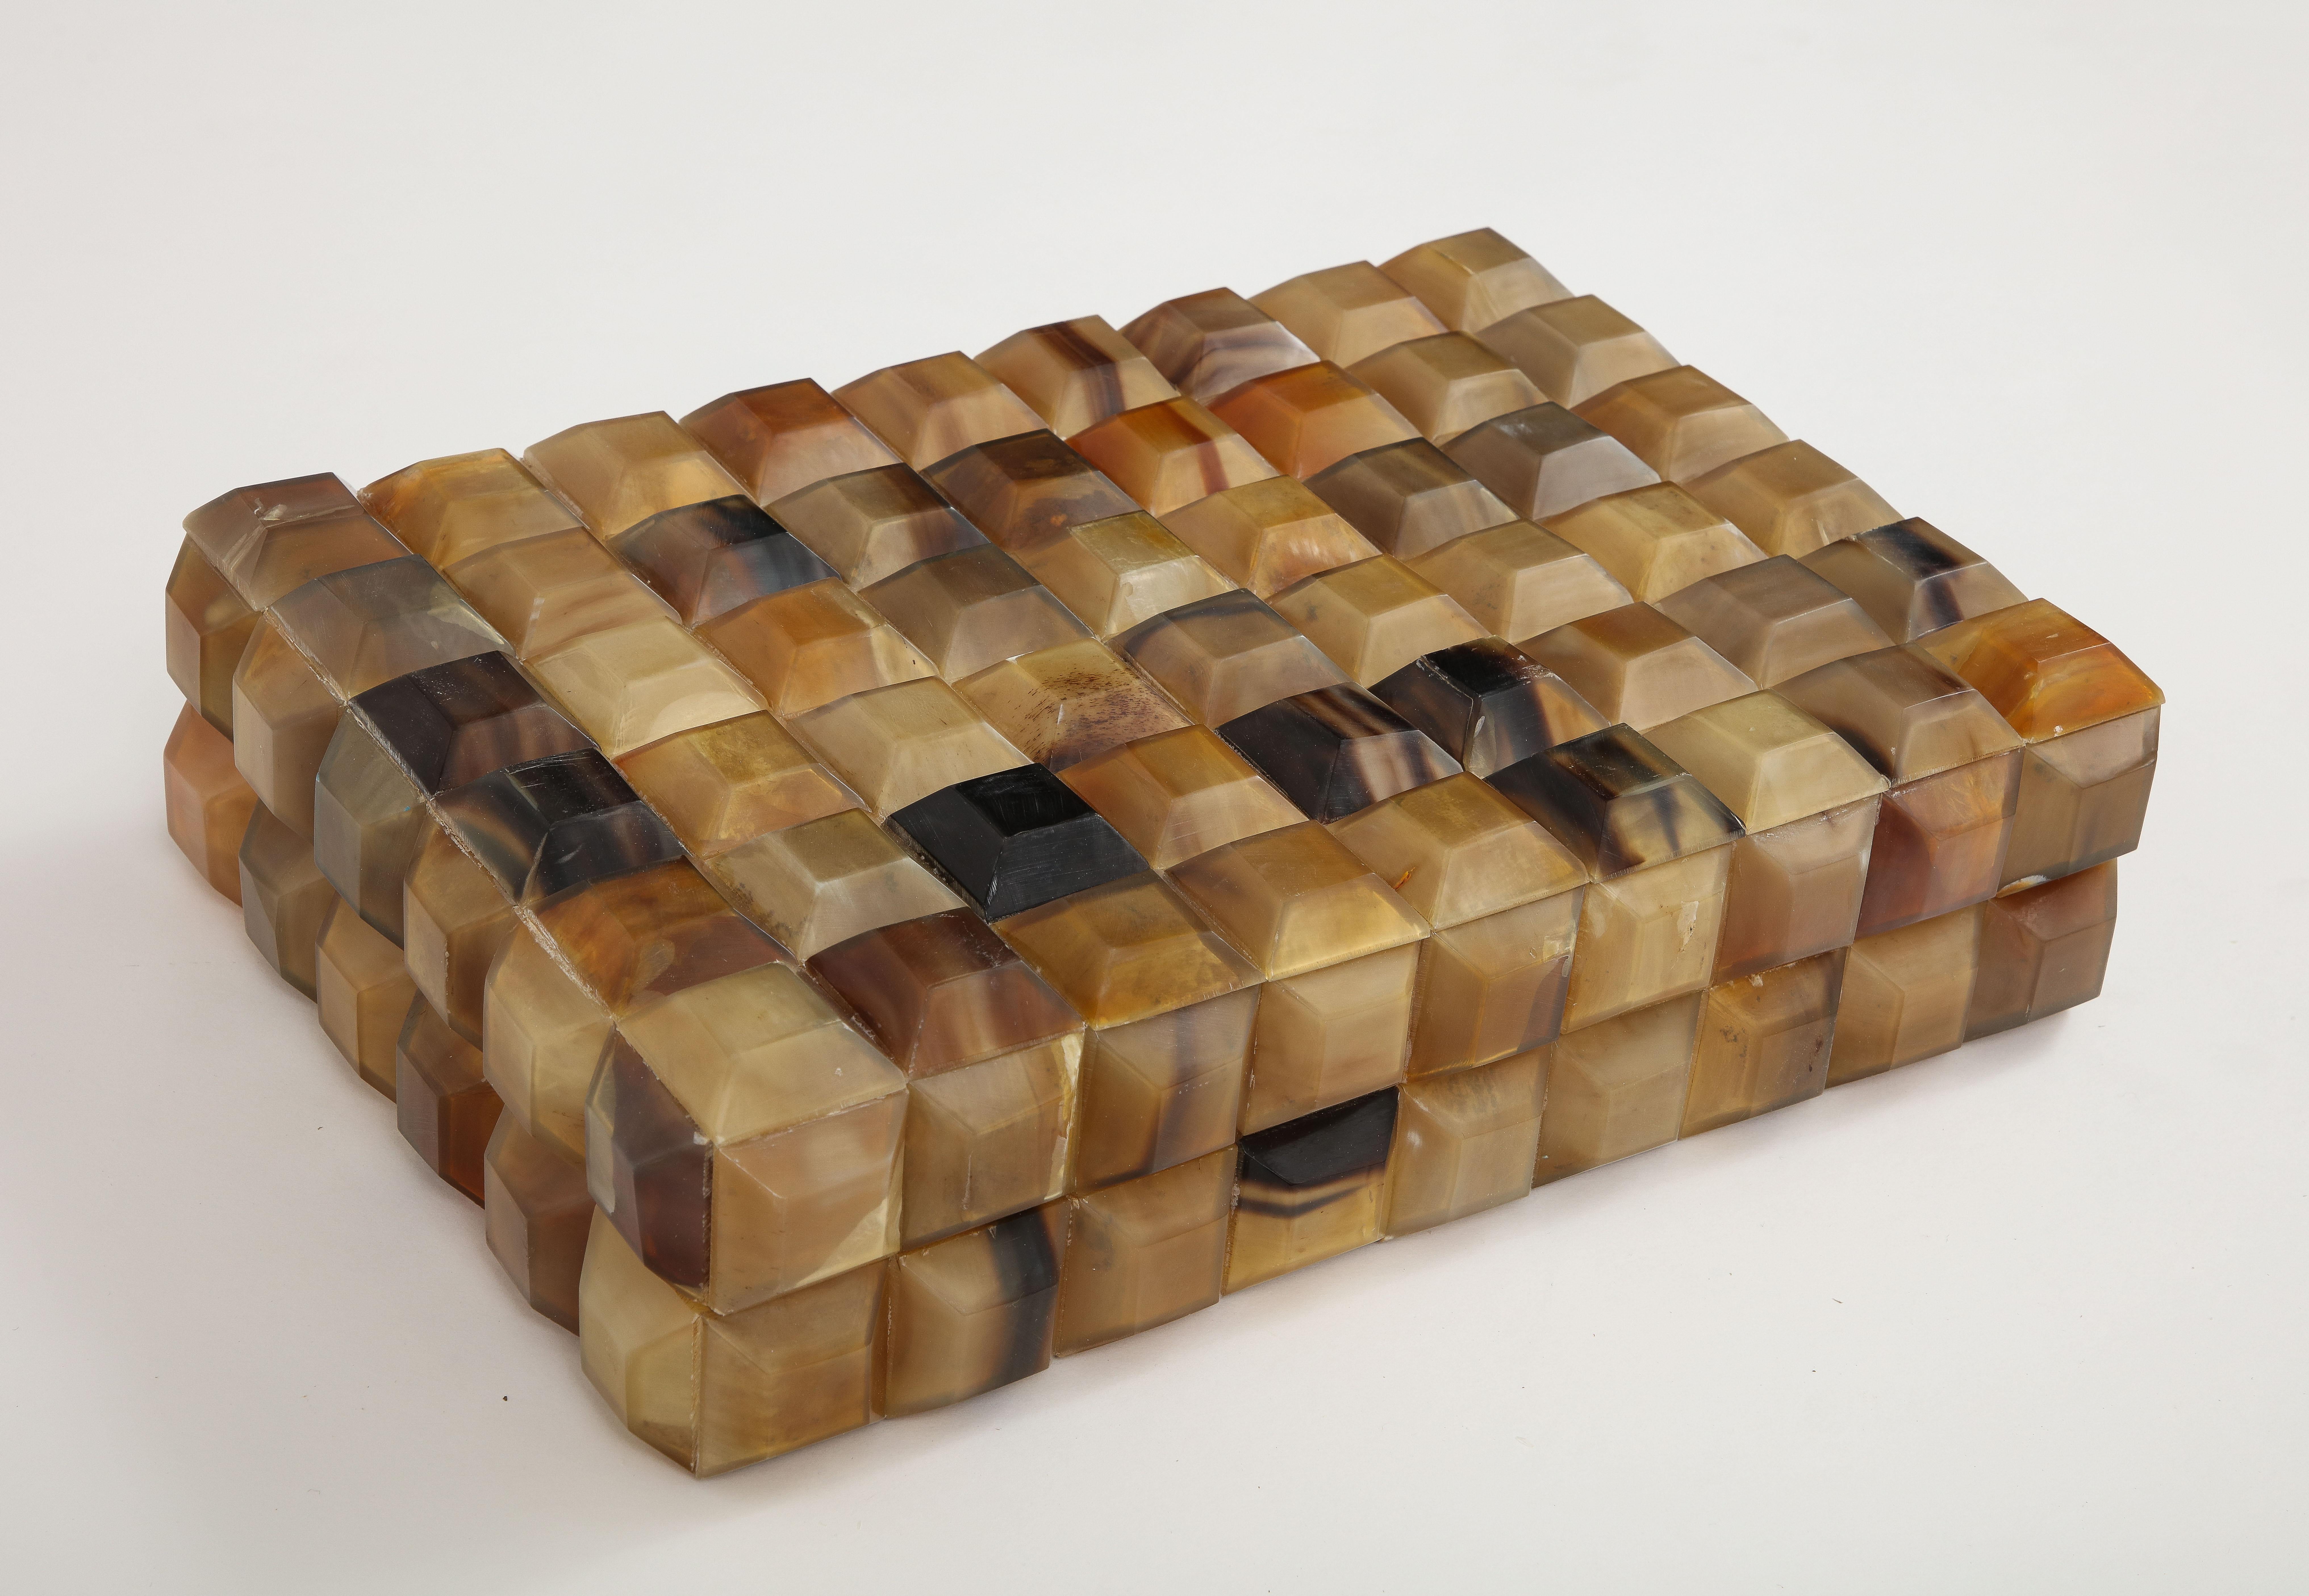 Dimensional keepsake decorative box clad in in square shaped faceted horn elements, lined in wood. A great addition to any coffee table or desk. Measures: 14x10.